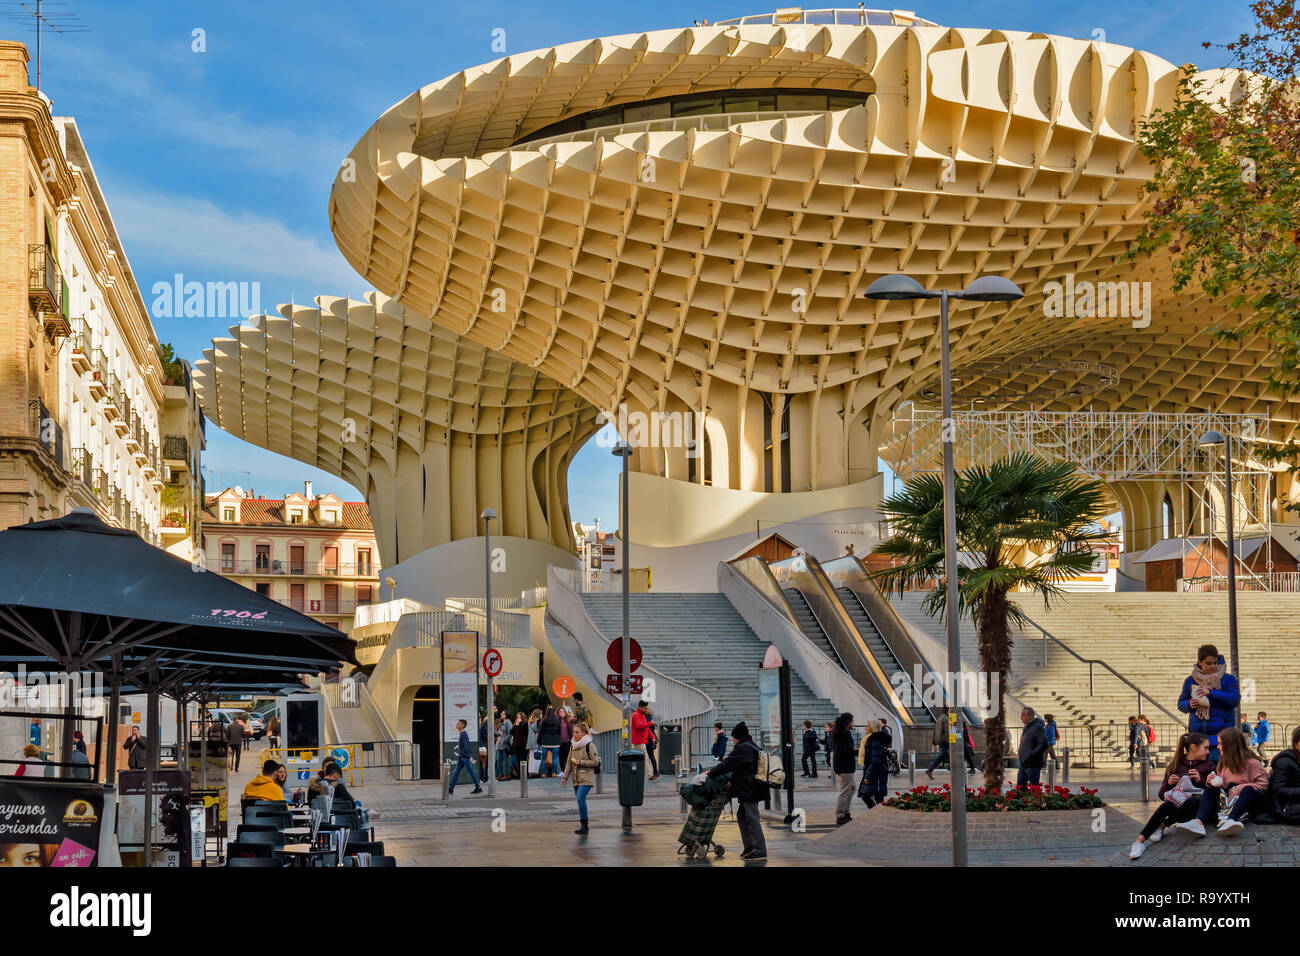 METROPOL PARASOL LA ENCARNACION SQUARE SEVILLE SPAIN EARLY MORNING WITH PEOPLE IN THE SQUARE Stock Photo